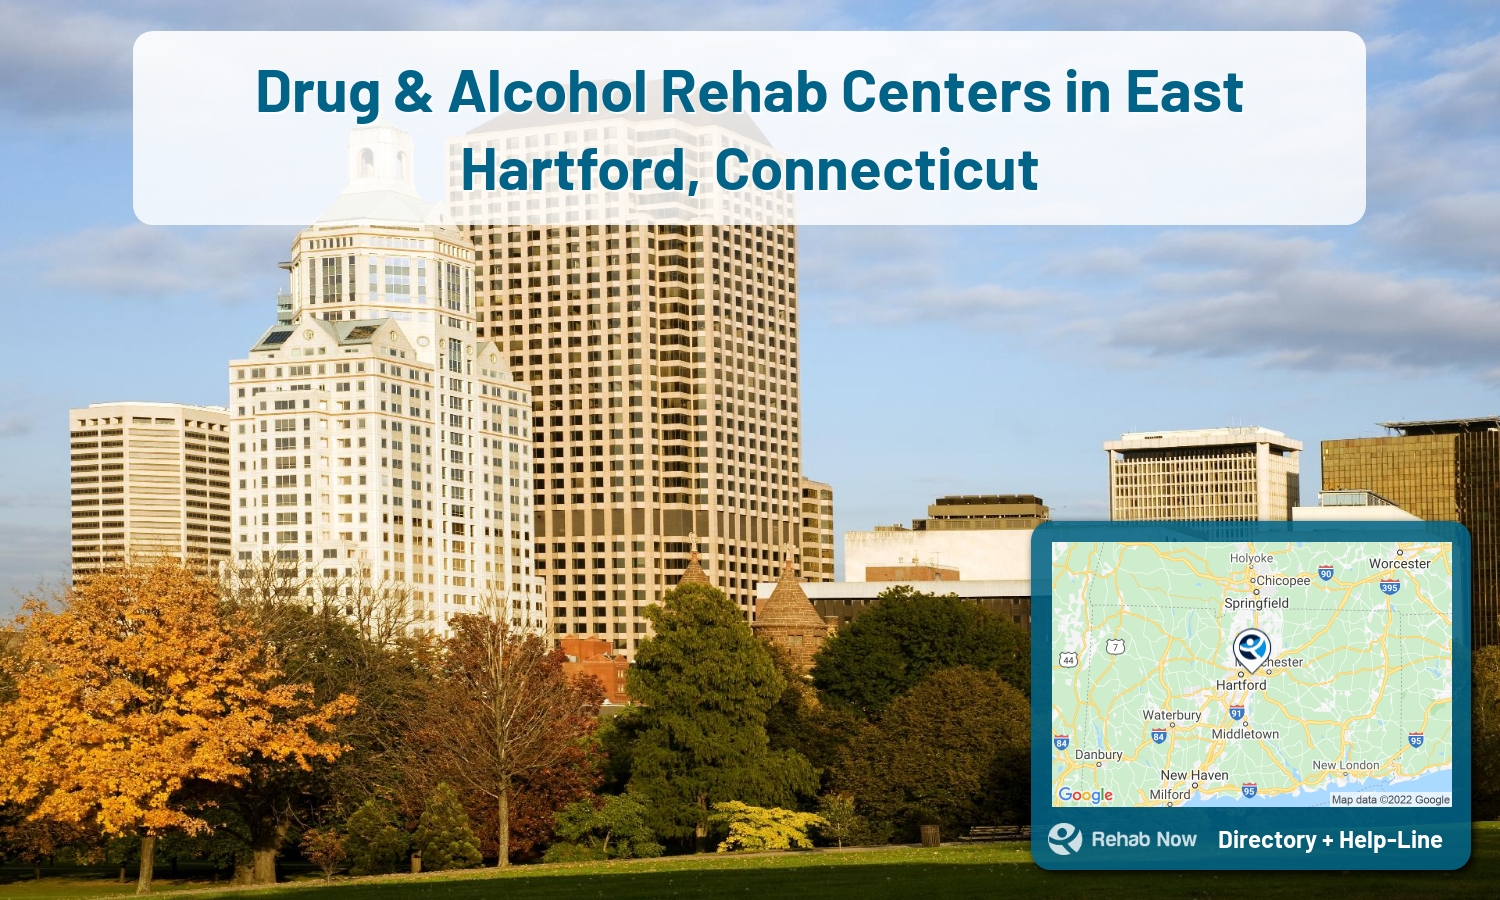 Find drug rehab and alcohol treatment services in East Hartford. Our experts help you find a center in East Hartford, Connecticut